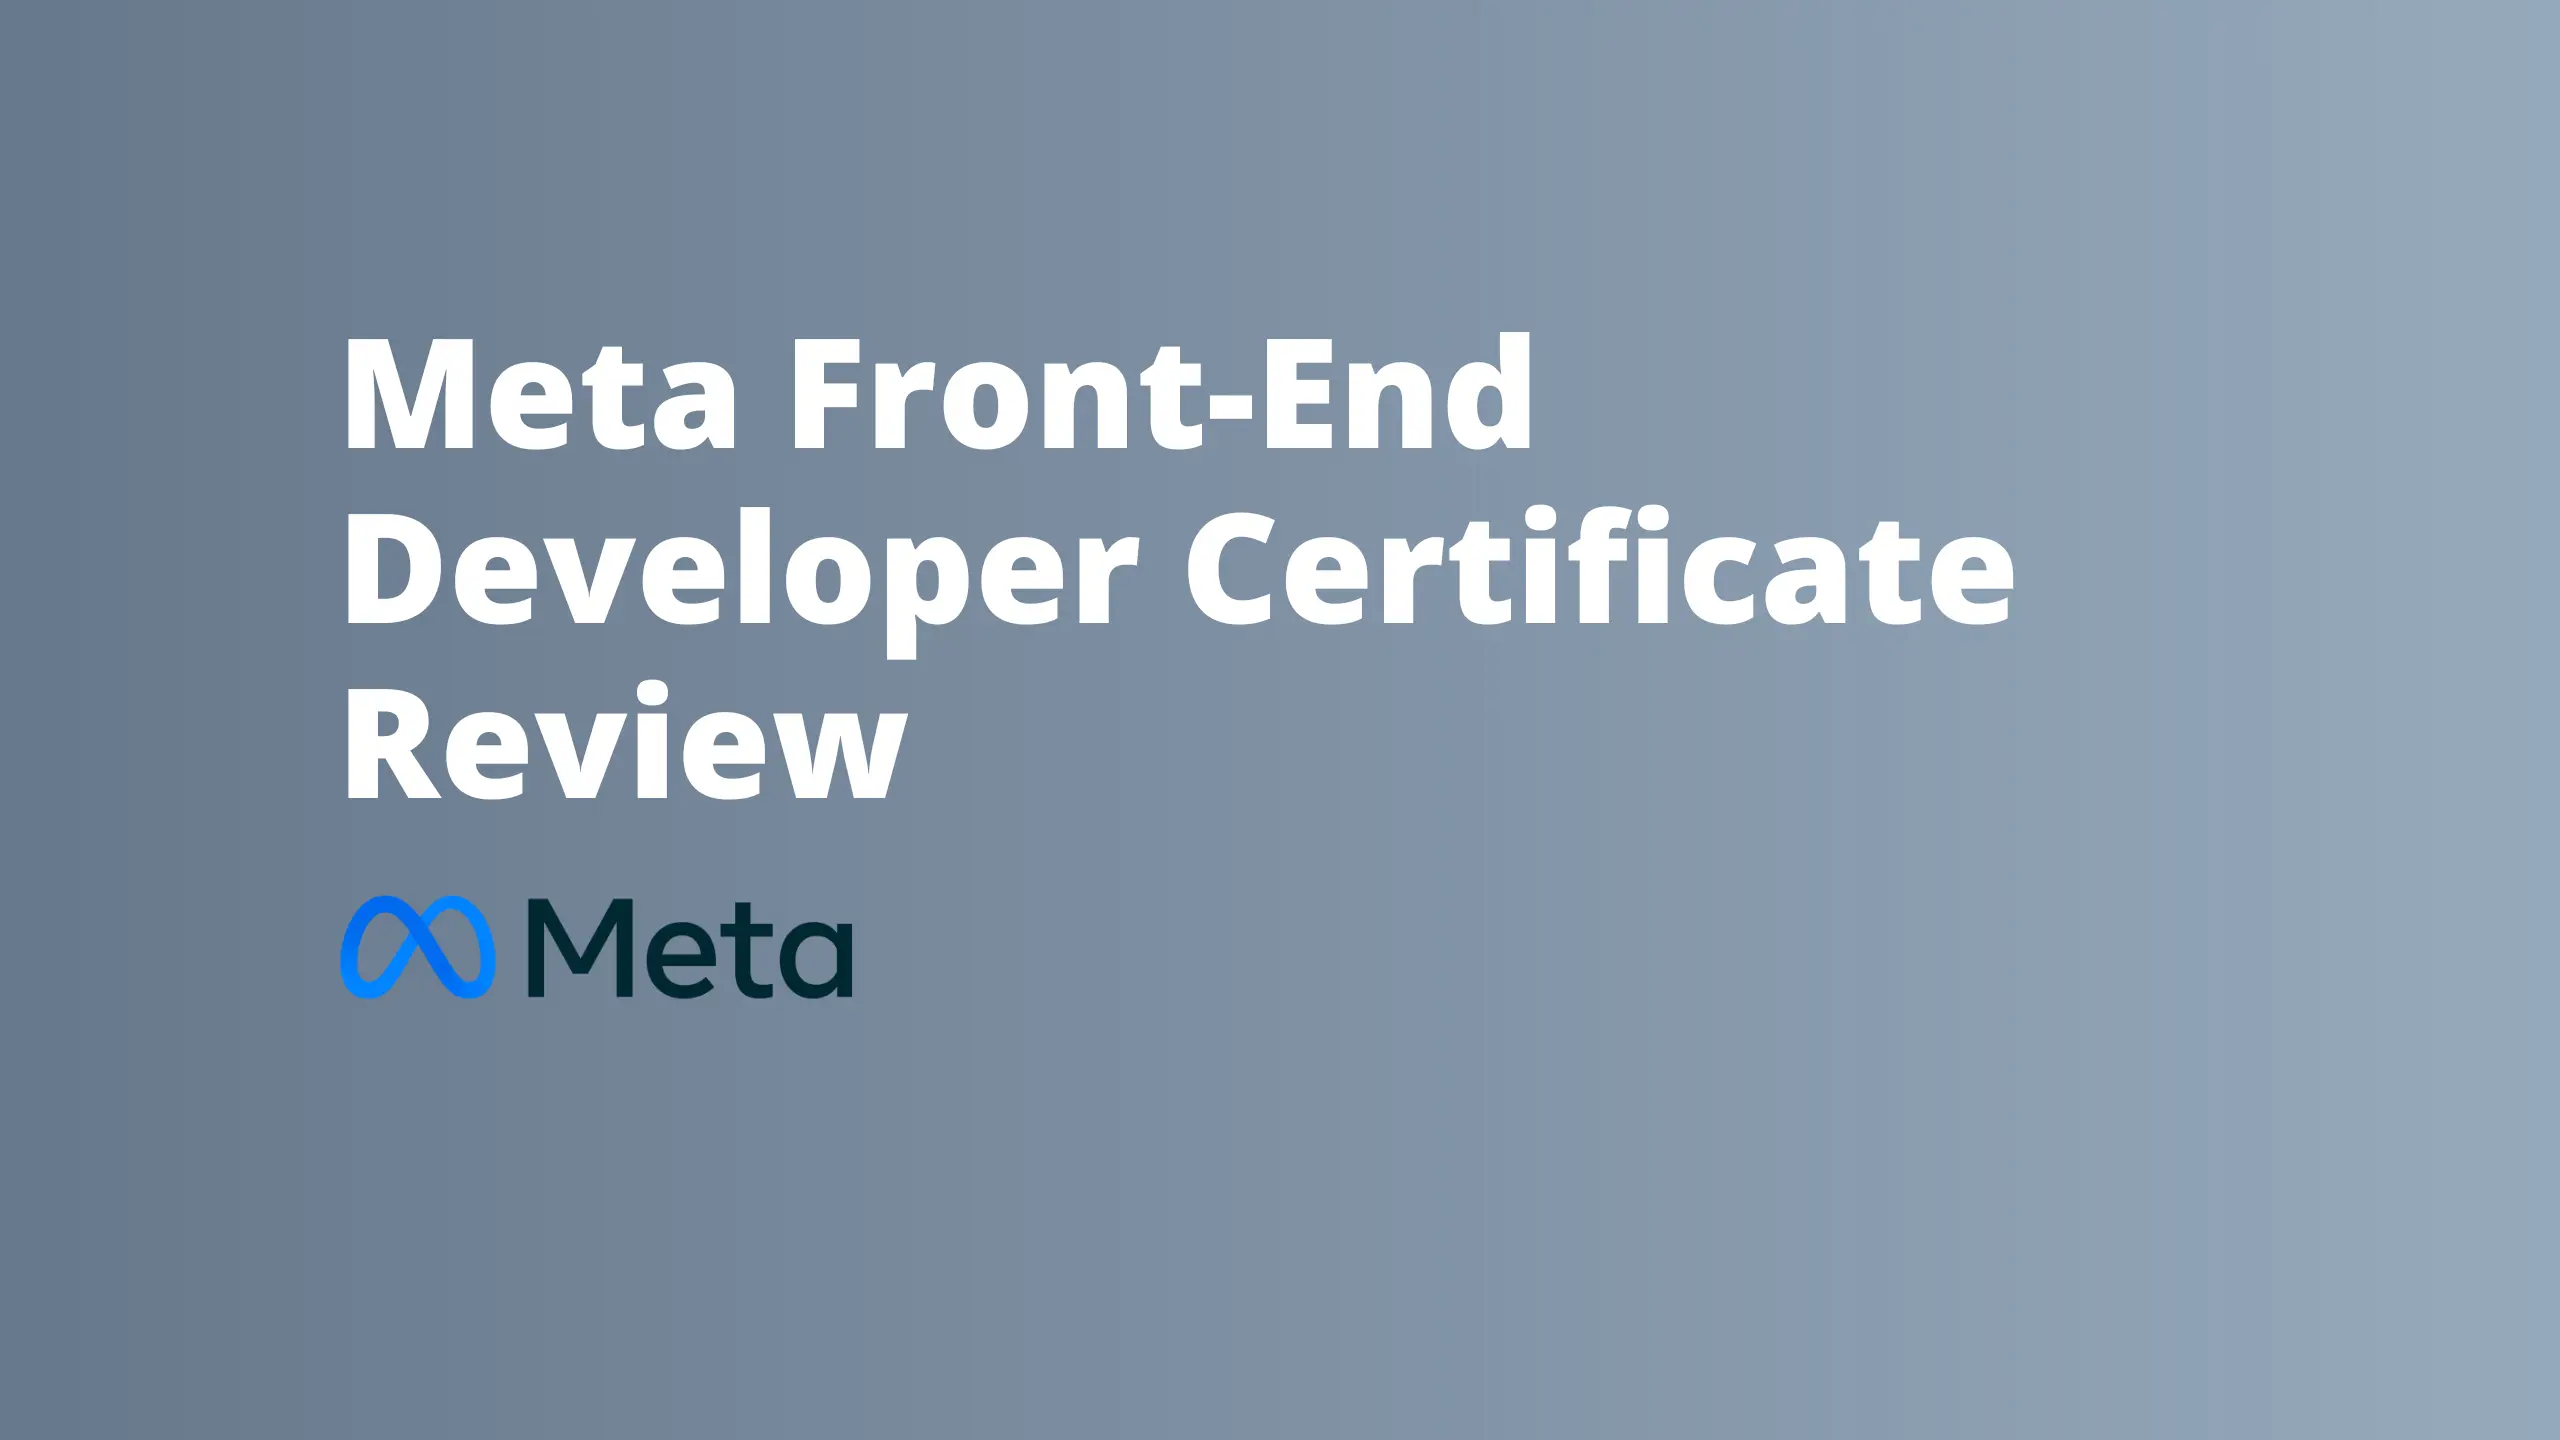 Meta Front-End Developer Certificate Review